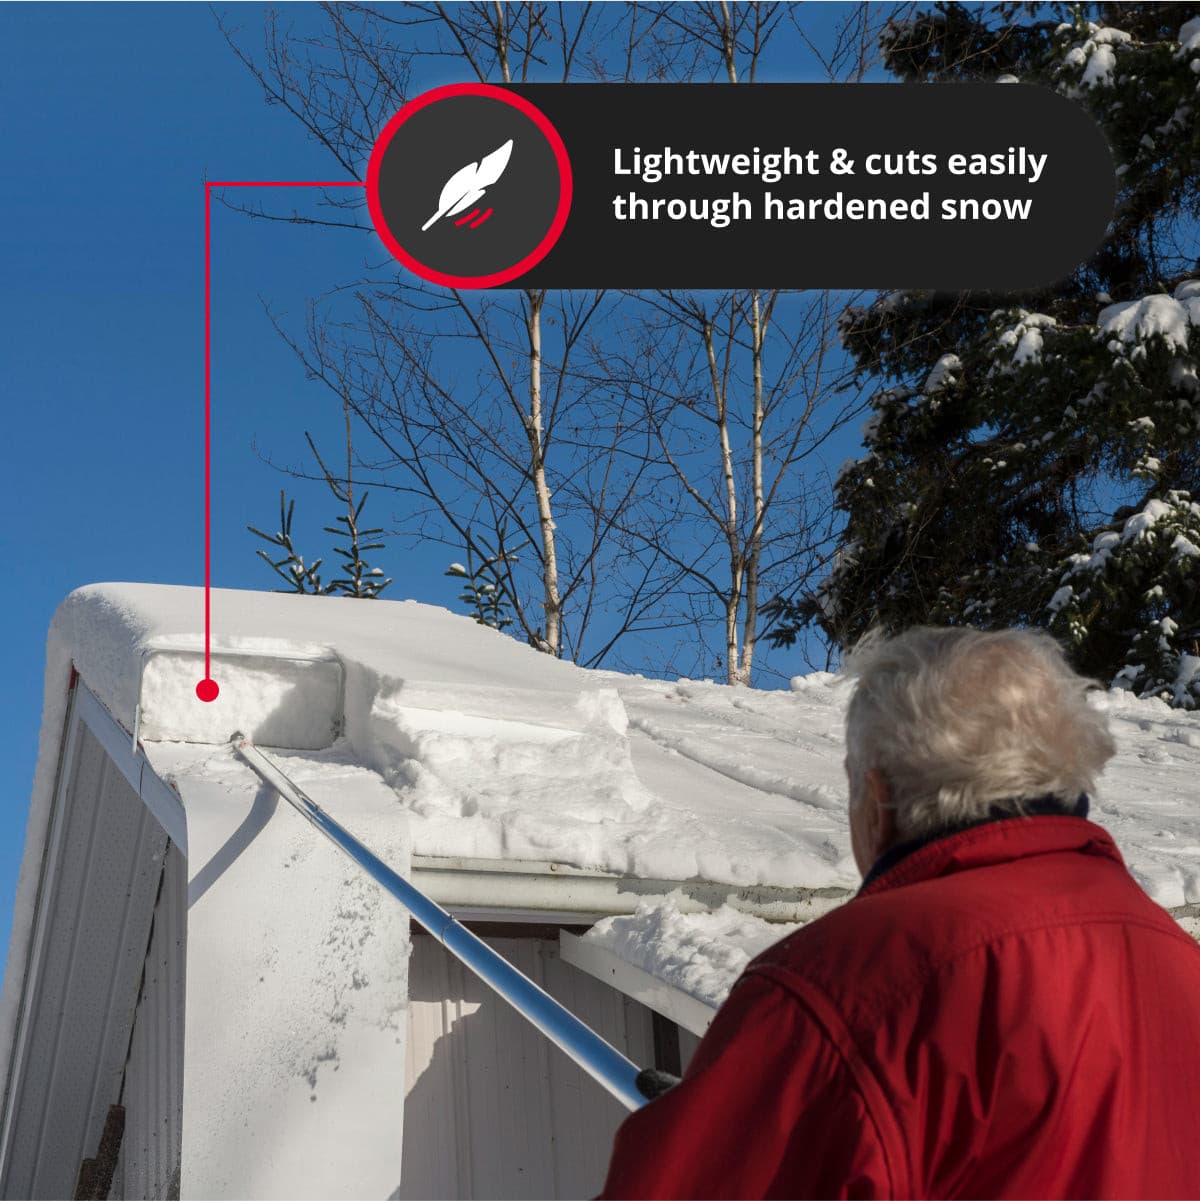 SnowPeeler PREMIUM - Long Handle Roof Rake with a 30 ft. (9 m.) reach, a Curved Handle Adapter and a 10 ft. (3 m.) Snow Slide.